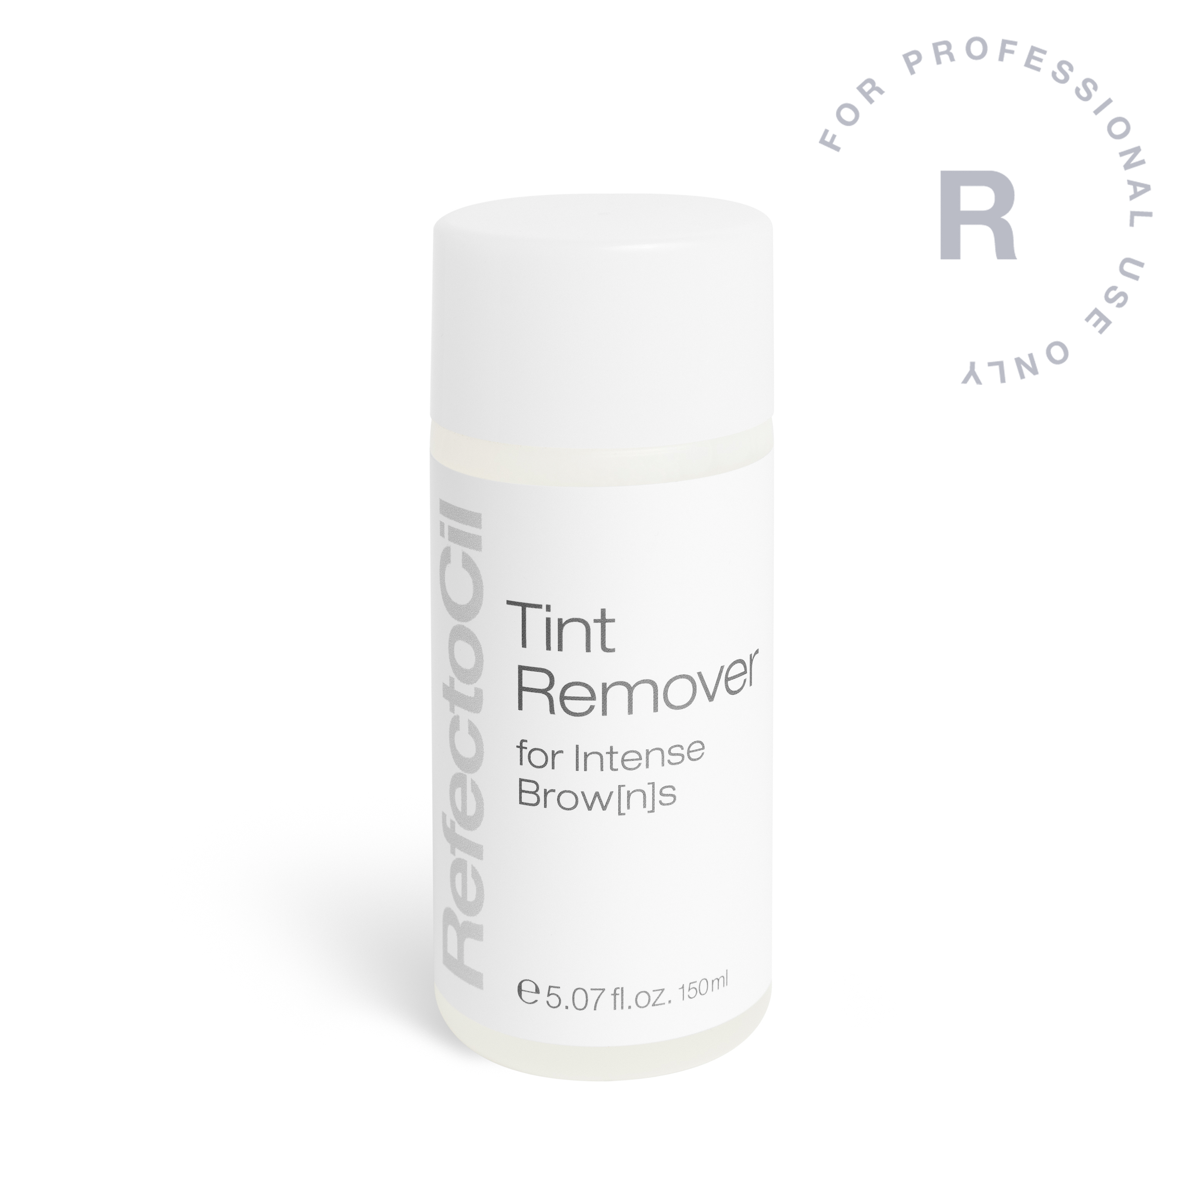 RefectoCil Intense Brow[n]s - Tint Remover 150ml - Creata Beauty - Professional Beauty Products